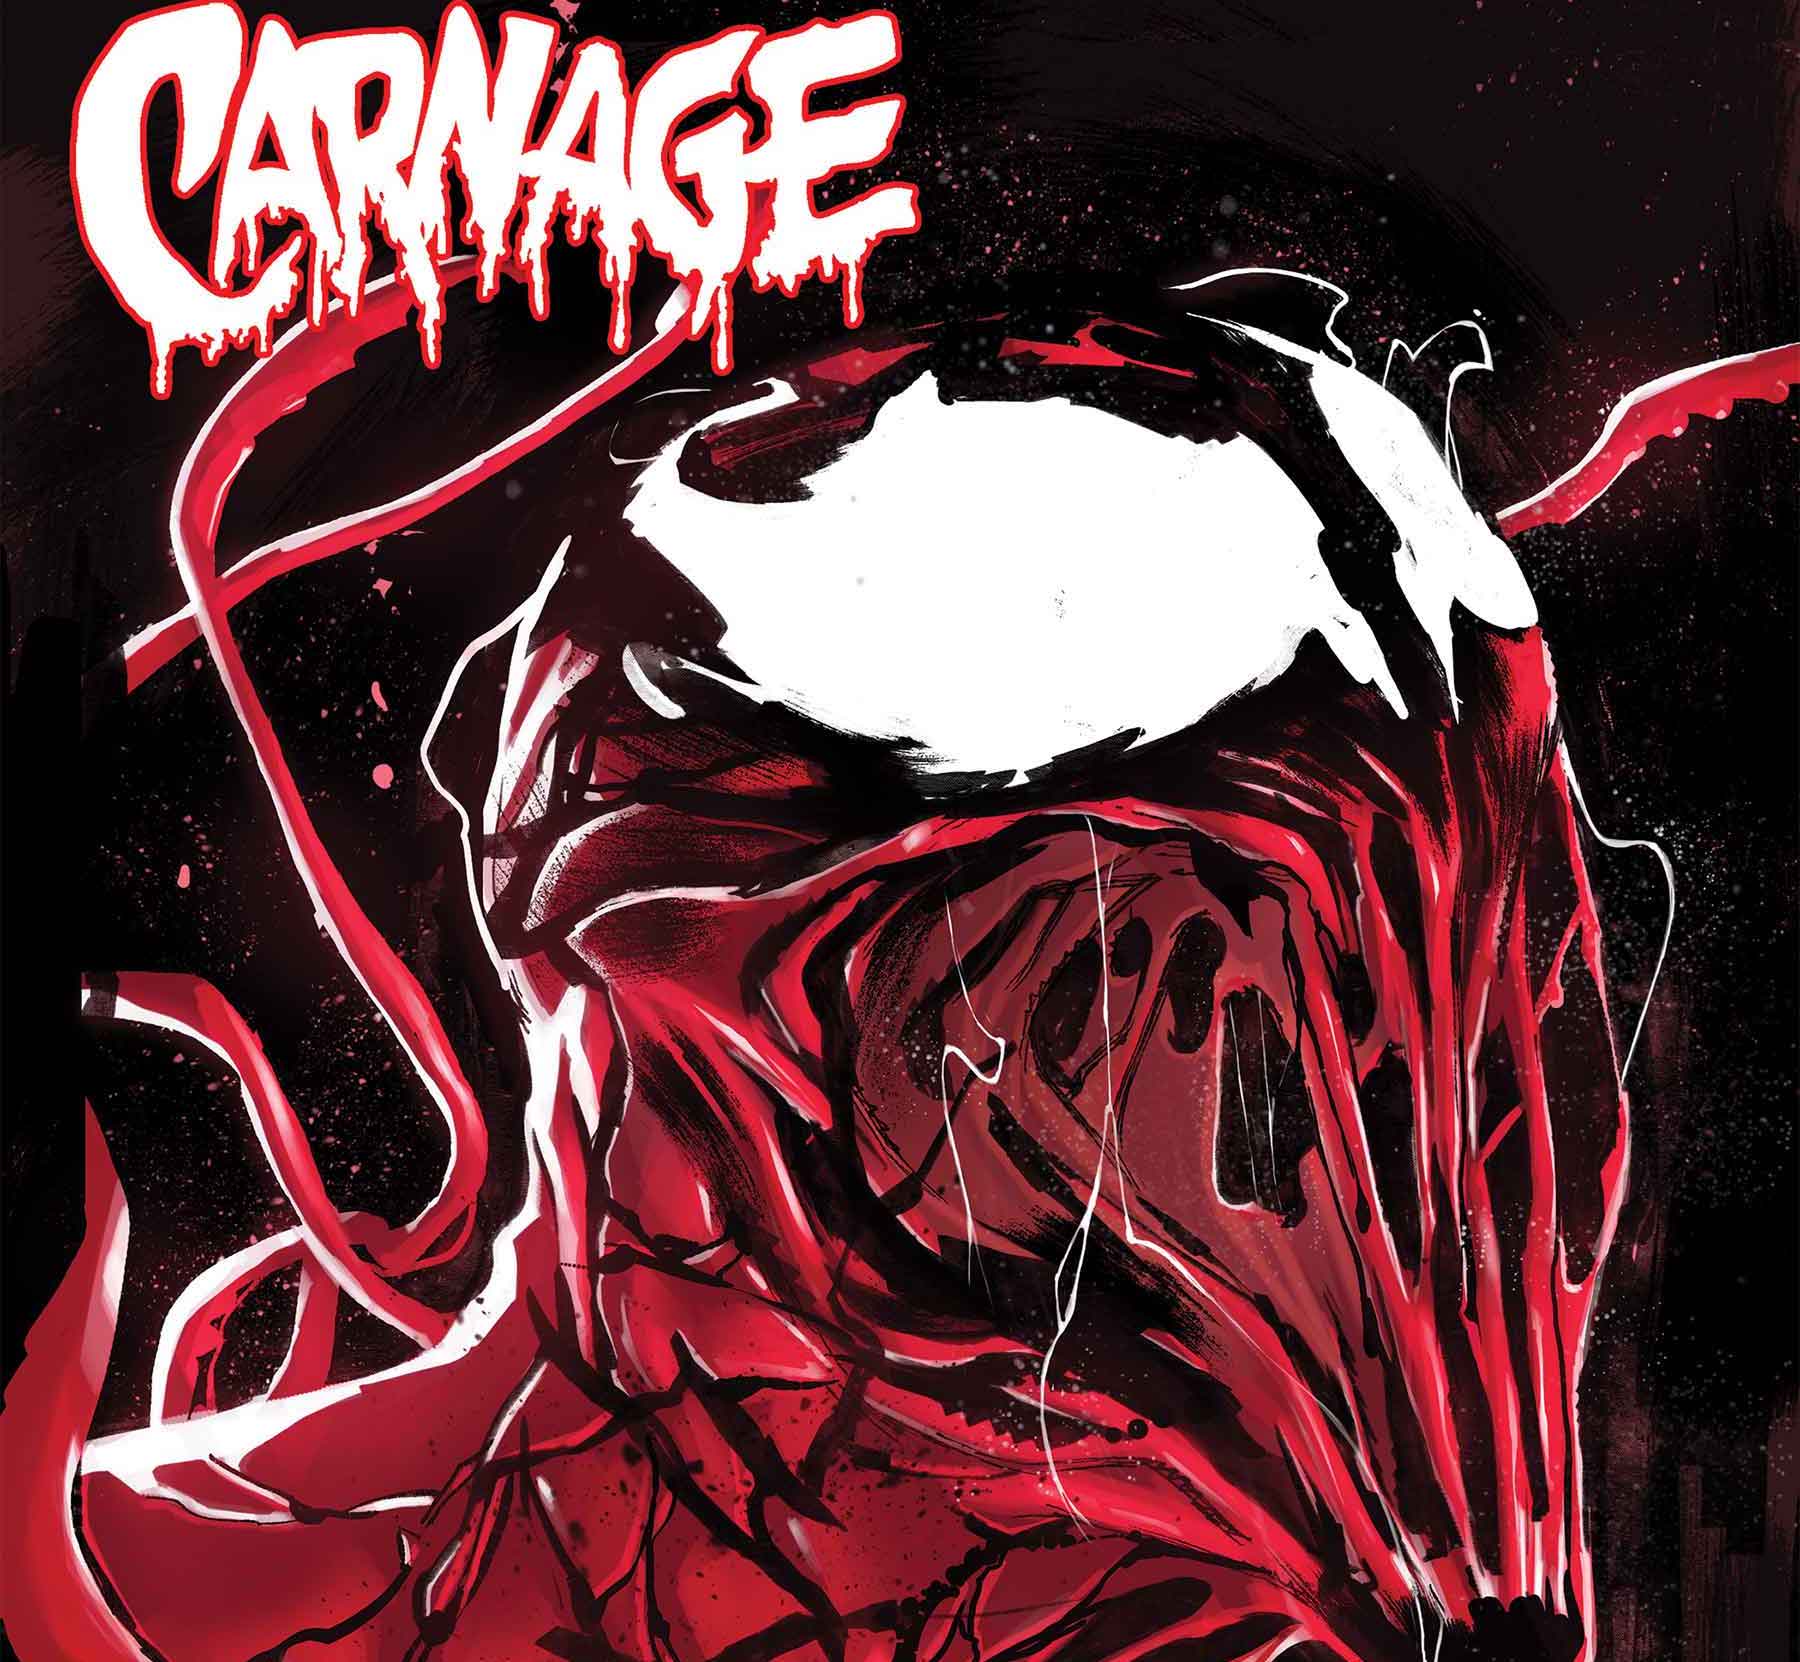 ‘Carnage: Black, White & Blood’ TPB is out now in all its bloody glory